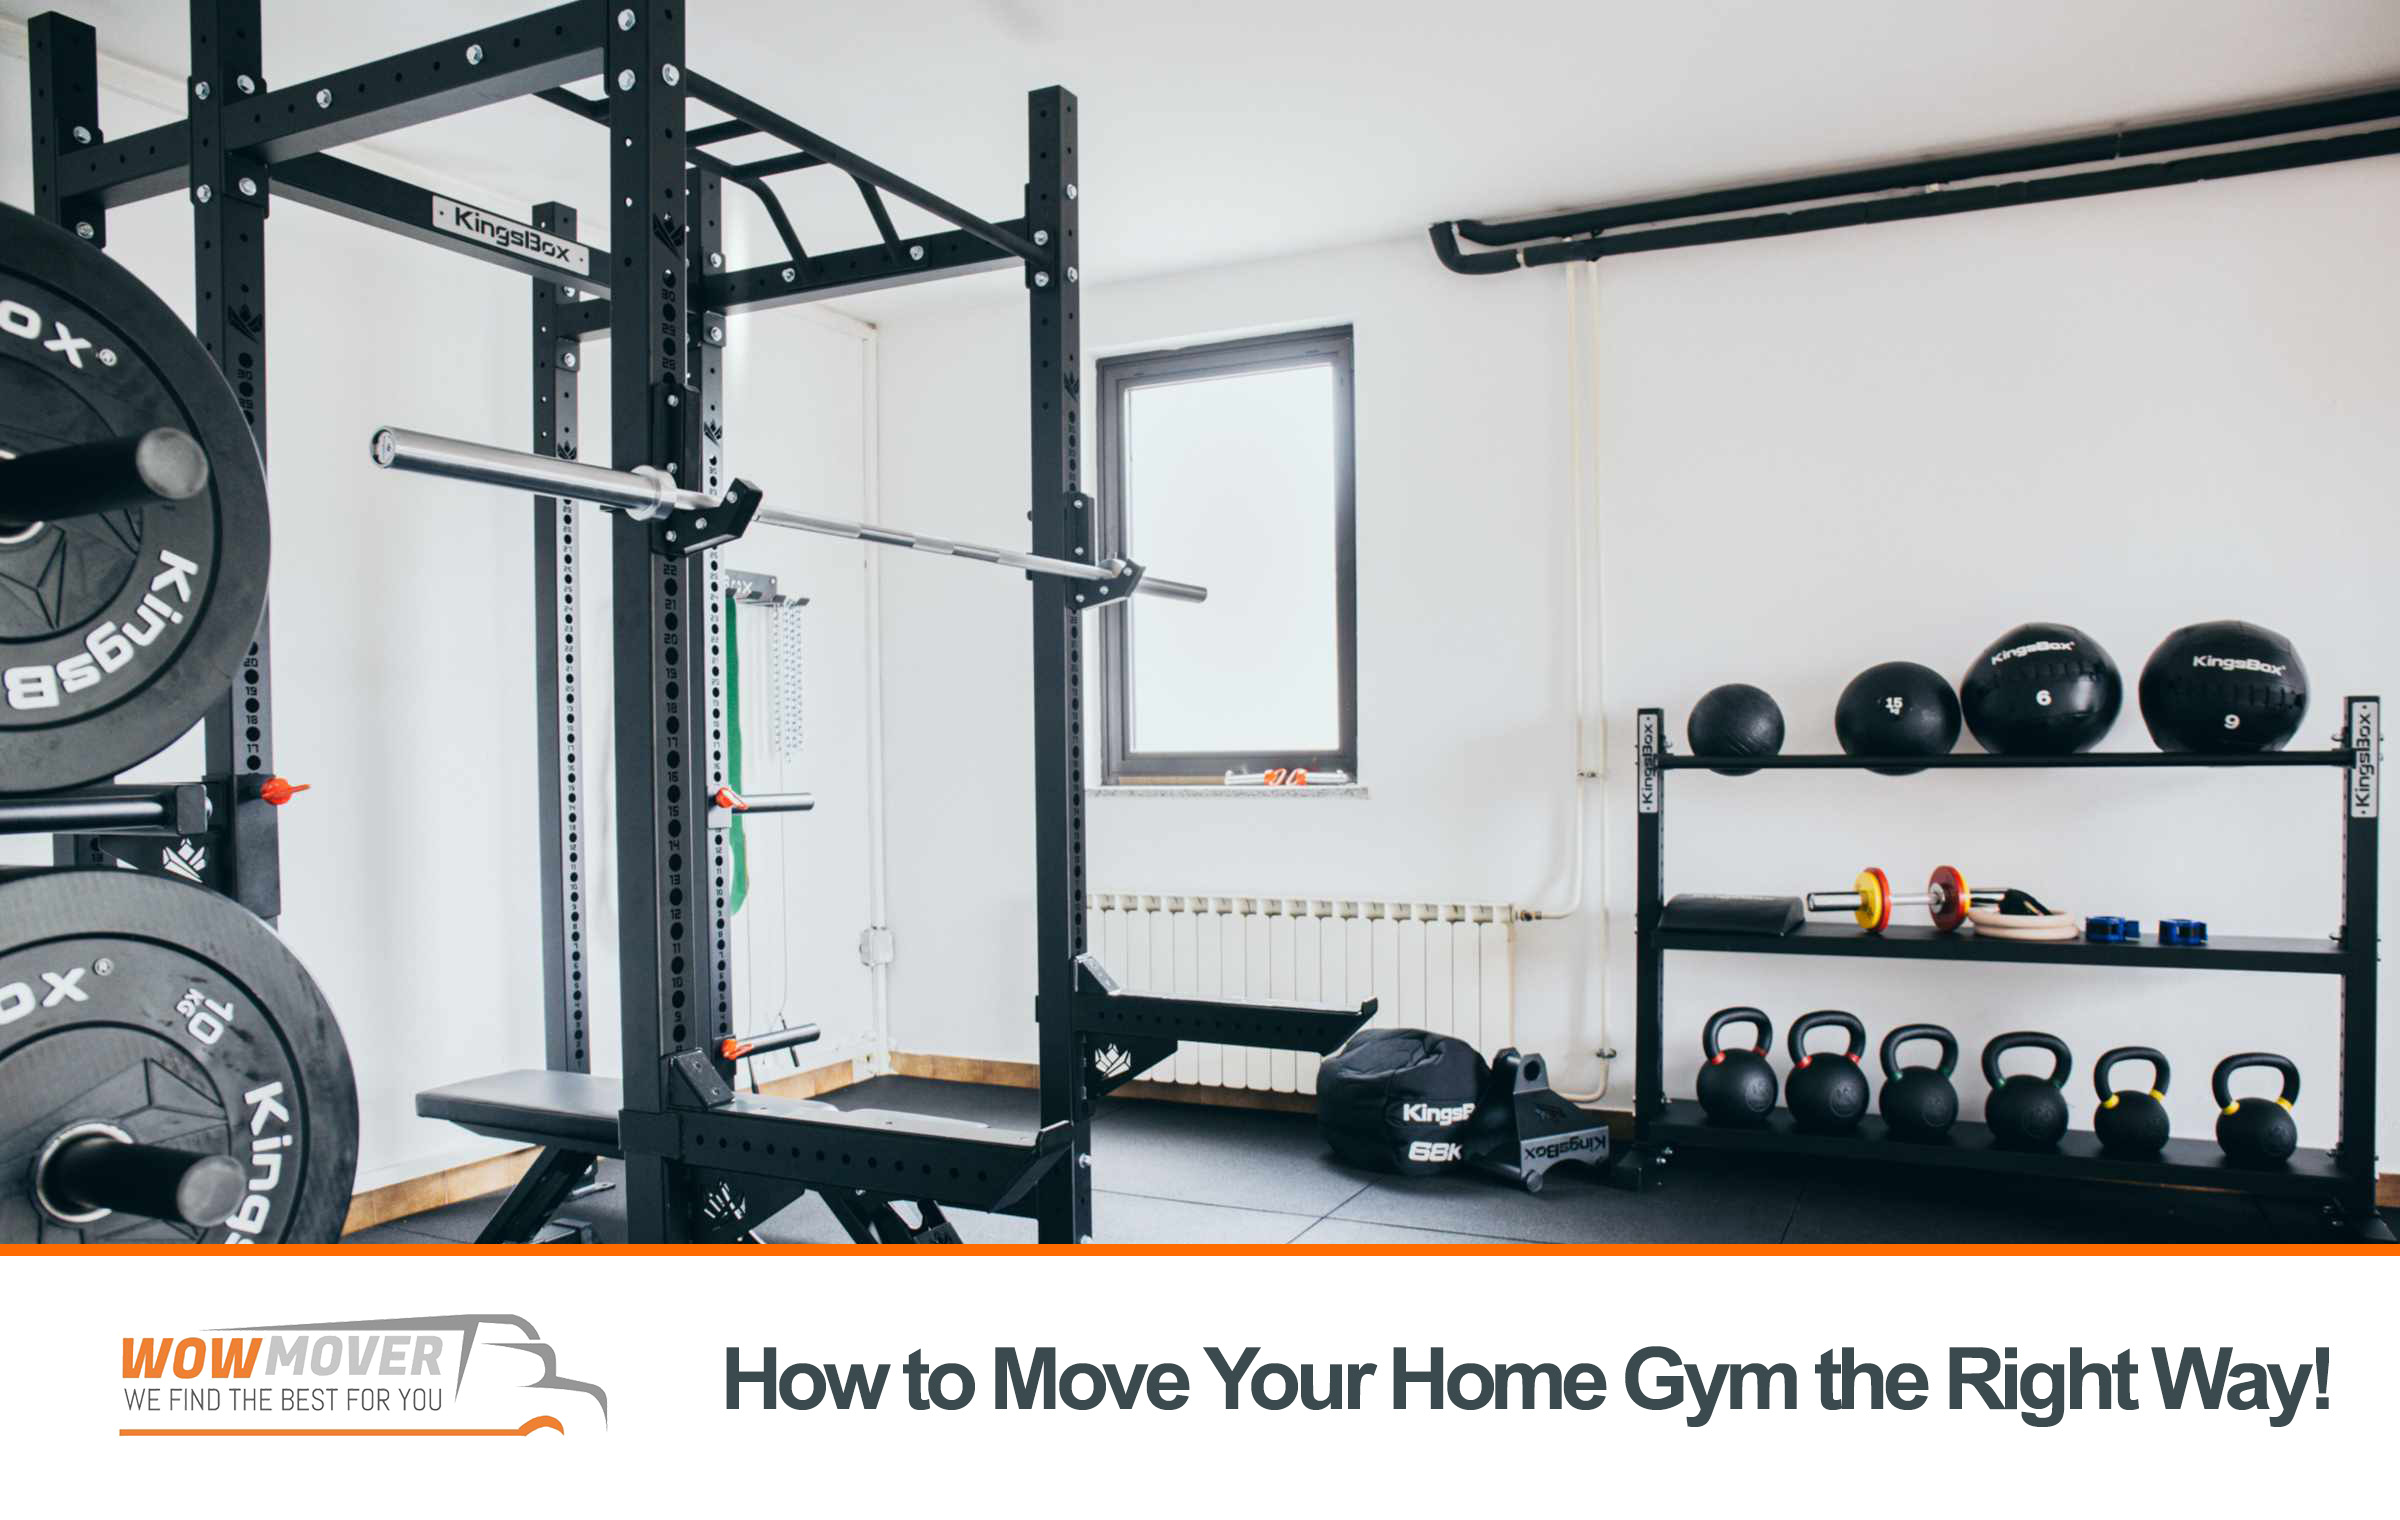 How to Move Your Home Gym the Right Way!